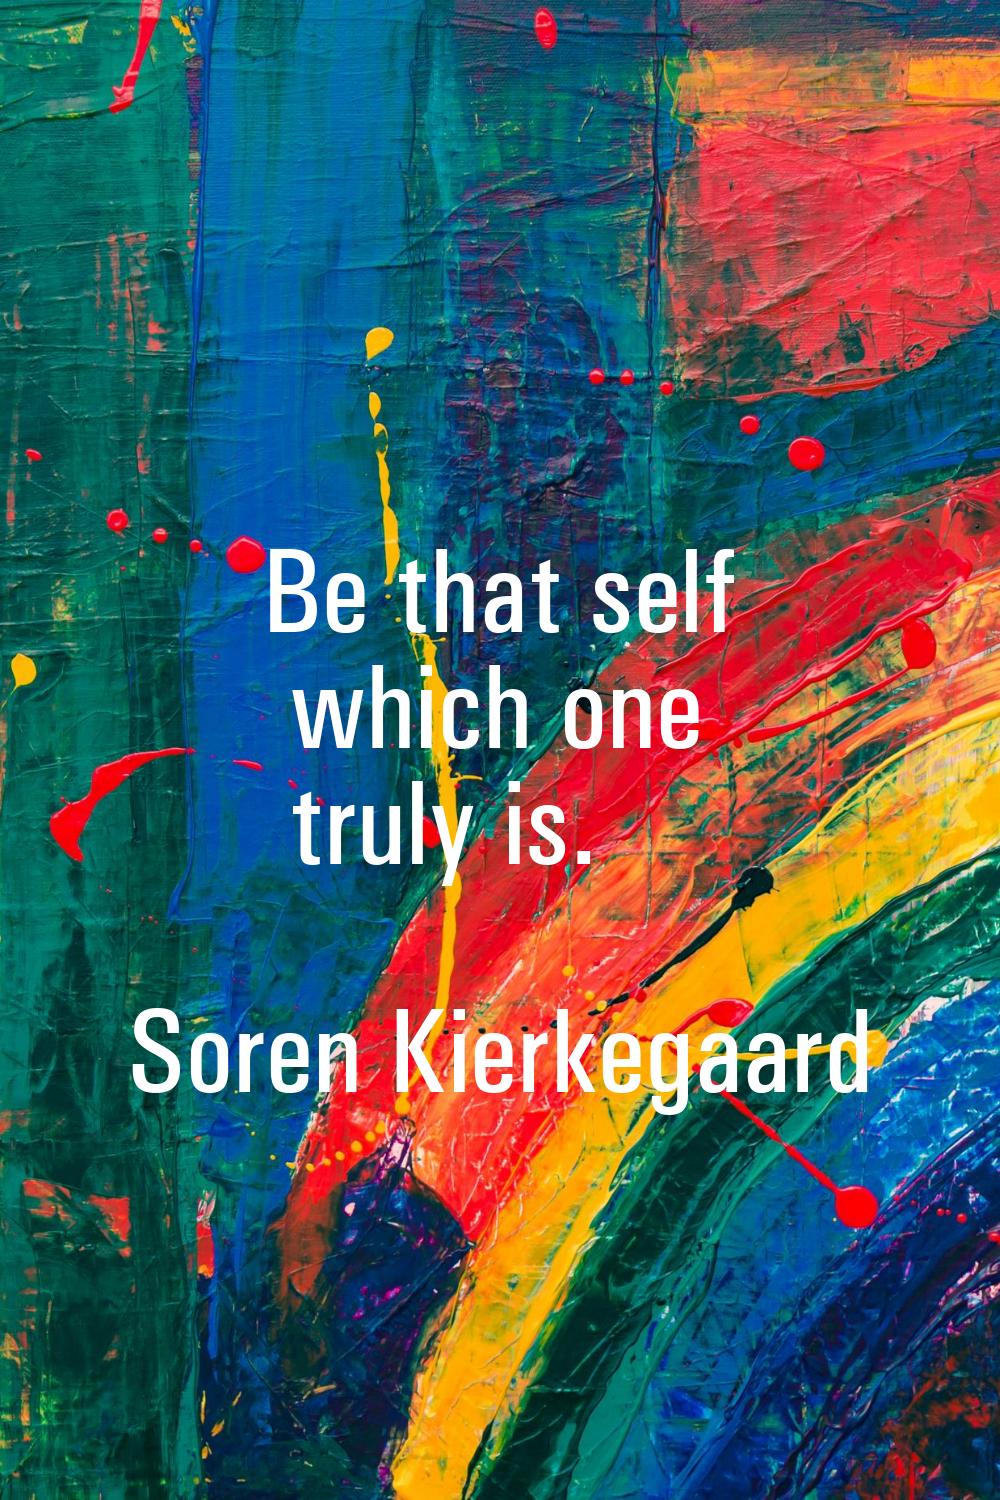 Be that self which one truly is.